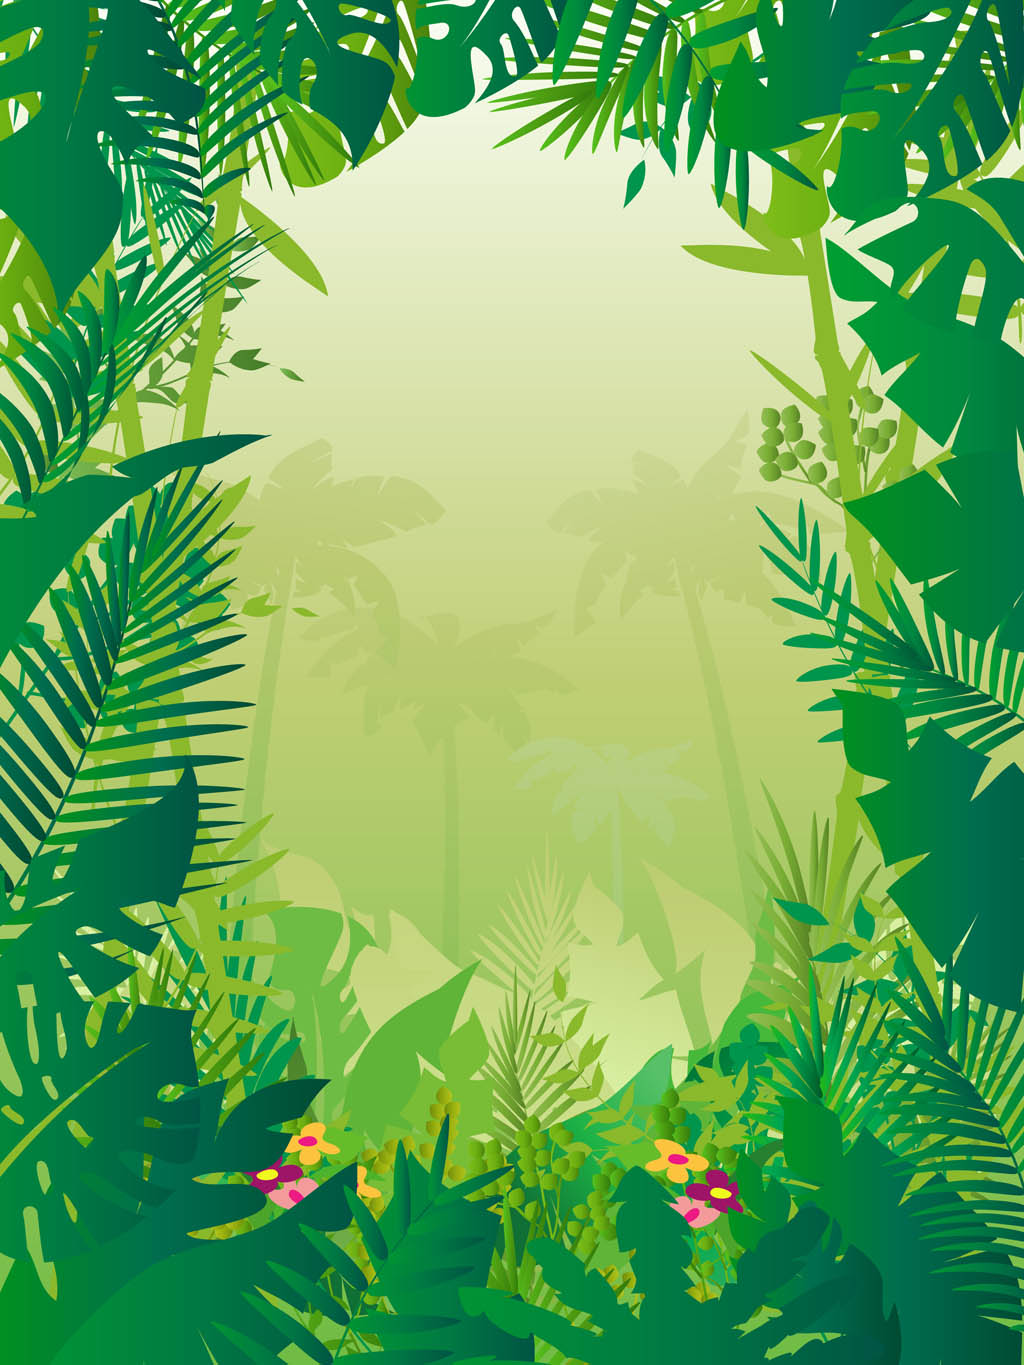 Jungle background clipart kid